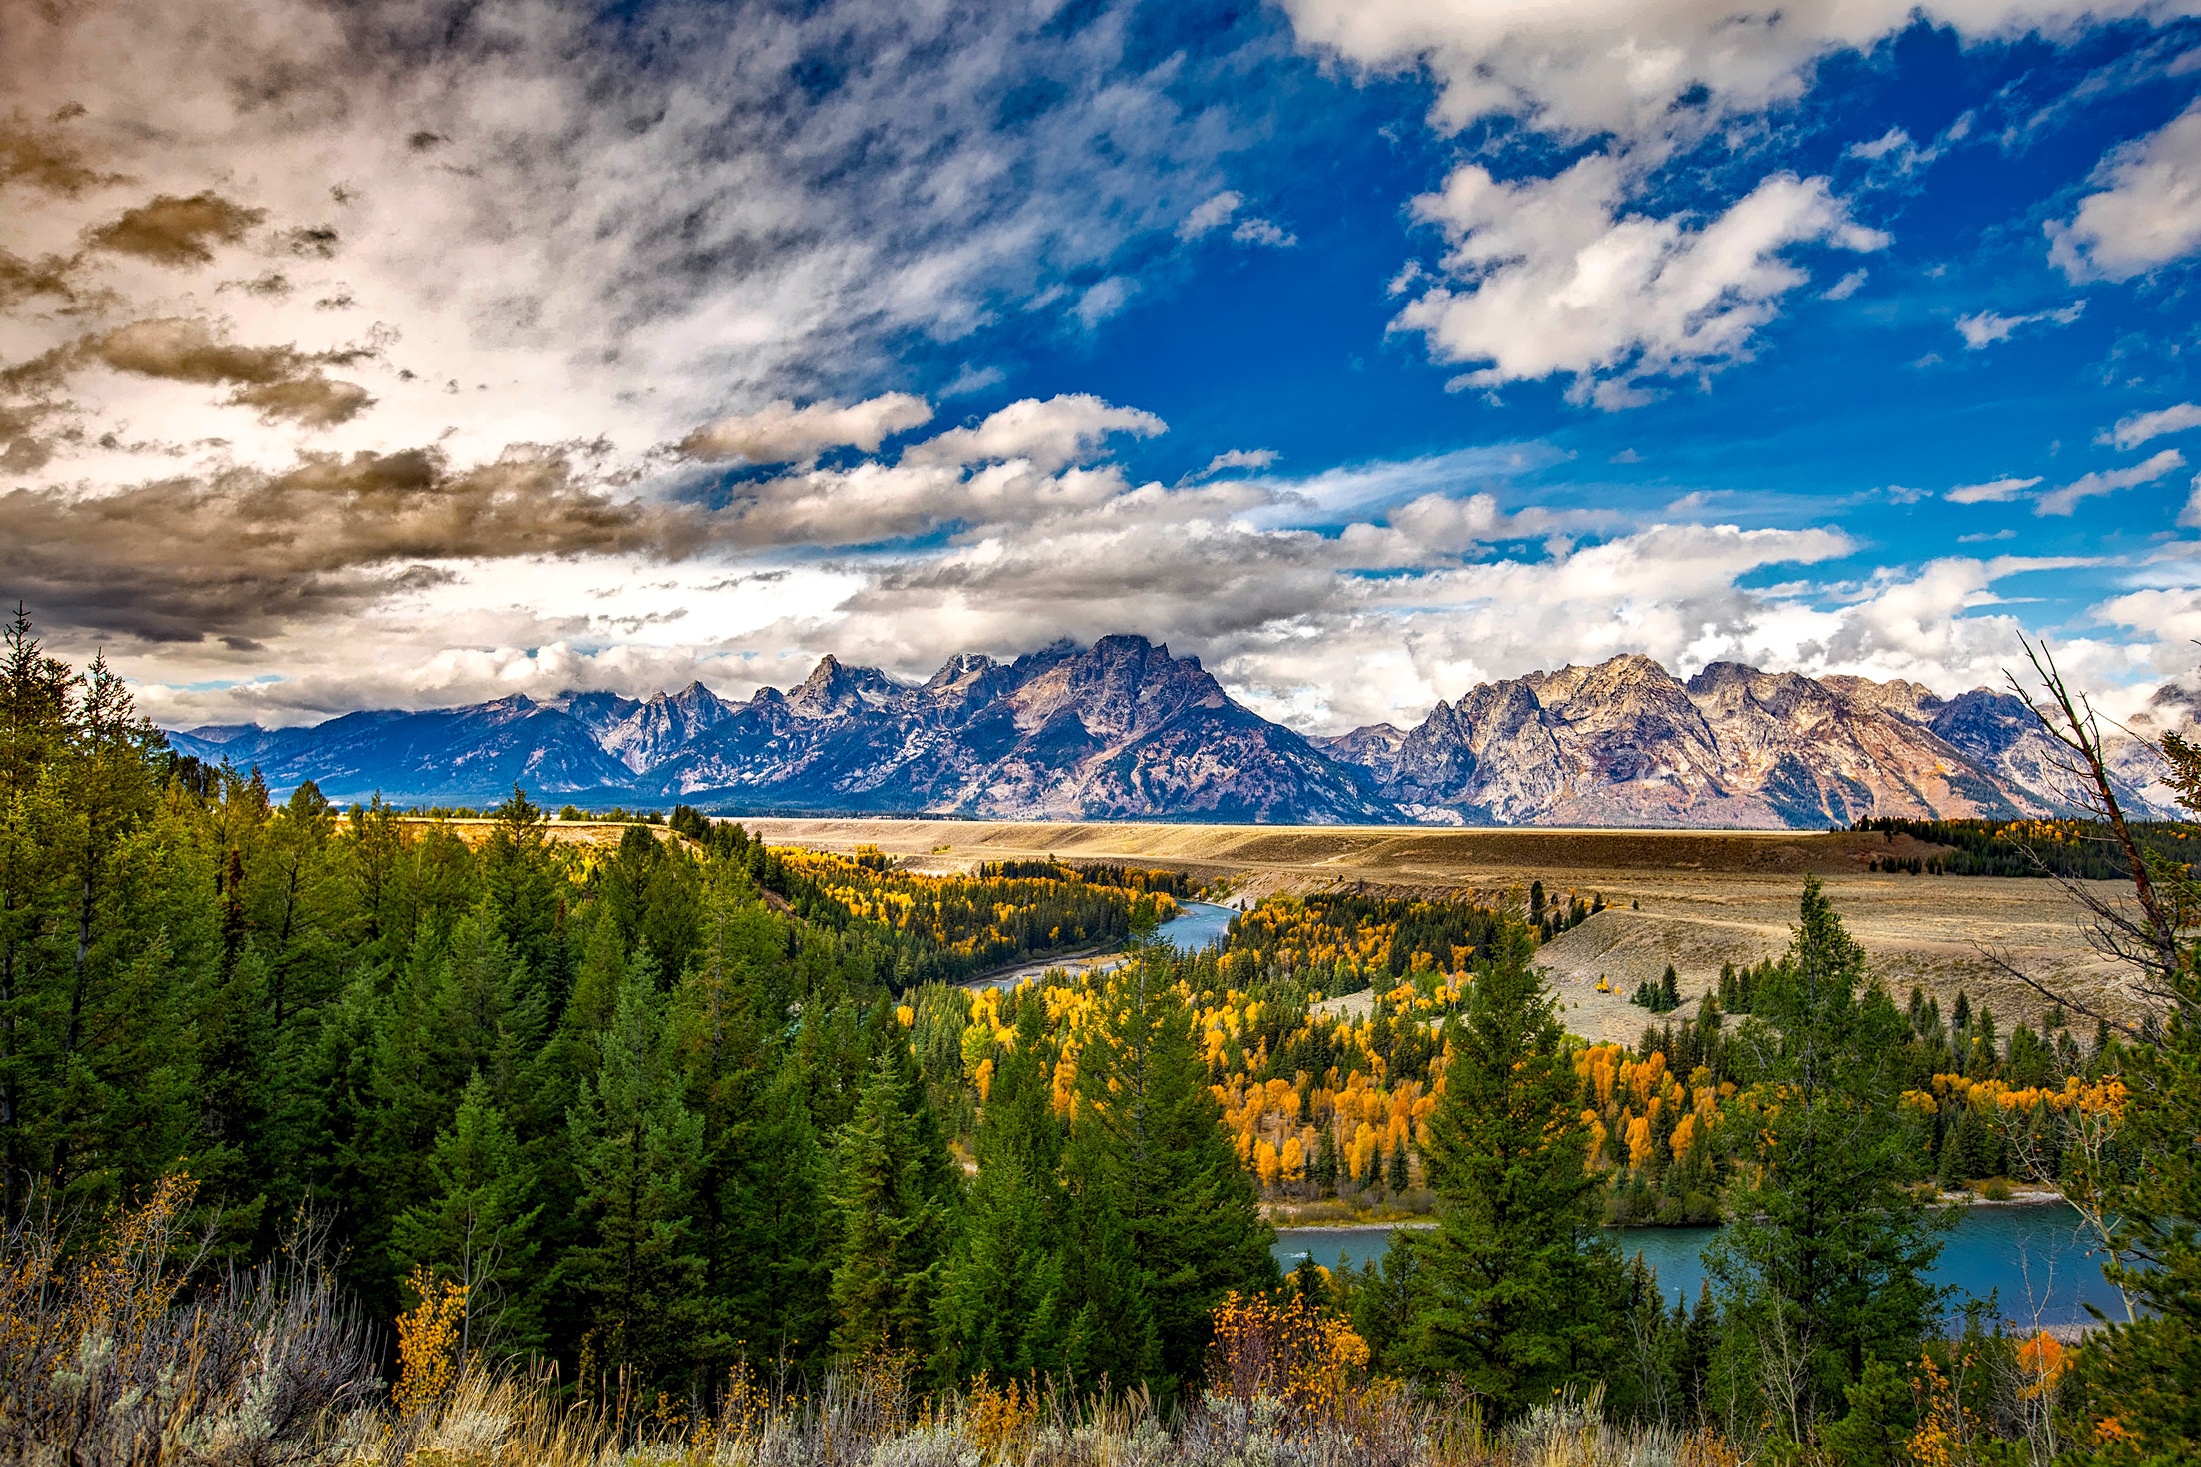 USA Forest River Landscape Cloud Fall Wyoming Grand Teton National Park Tree Mountain Nature 2201x1467